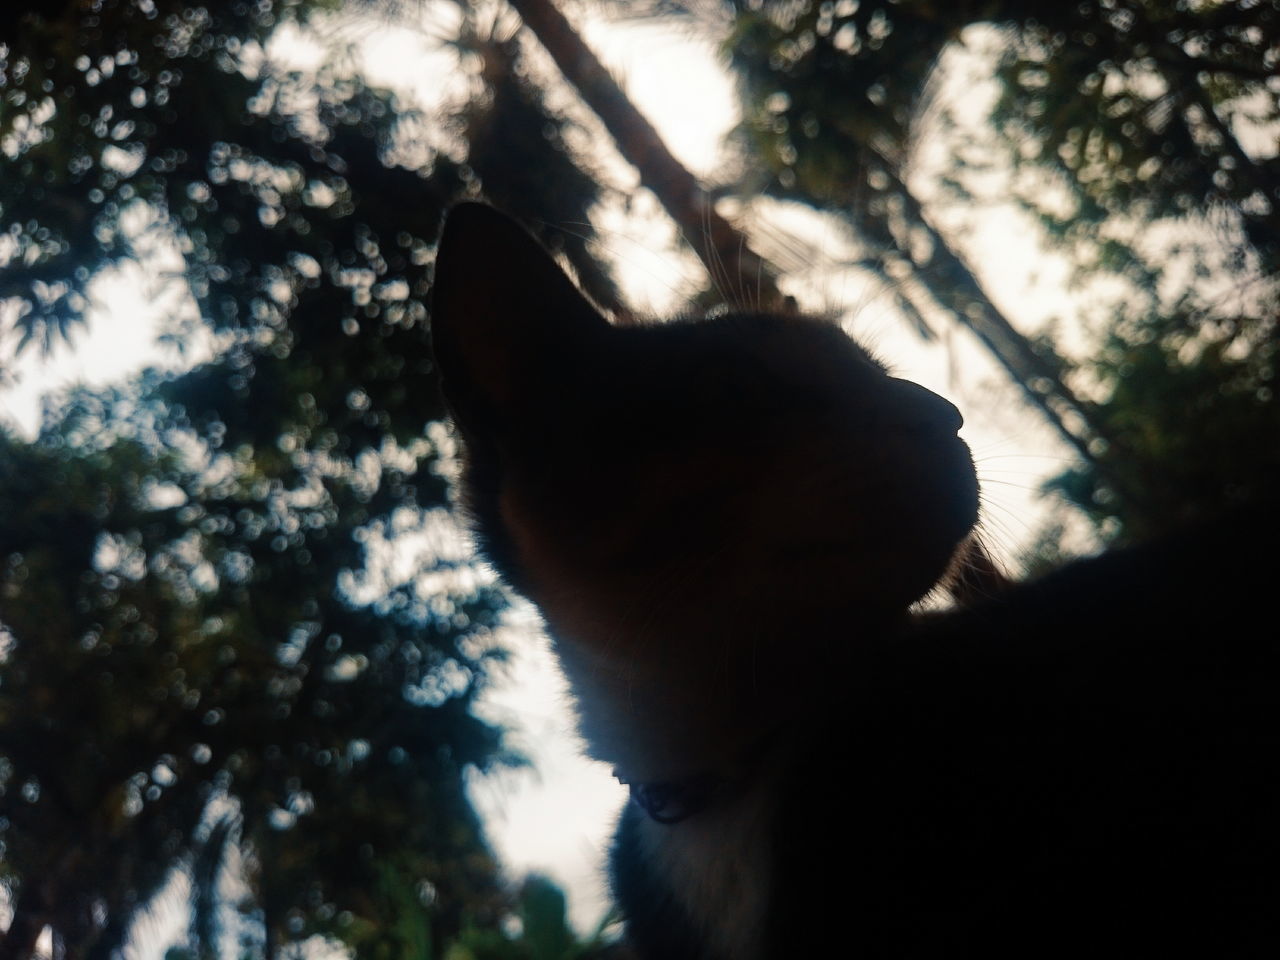 LOW ANGLE VIEW OF DOG LOOKING AT SILHOUETTE TREES